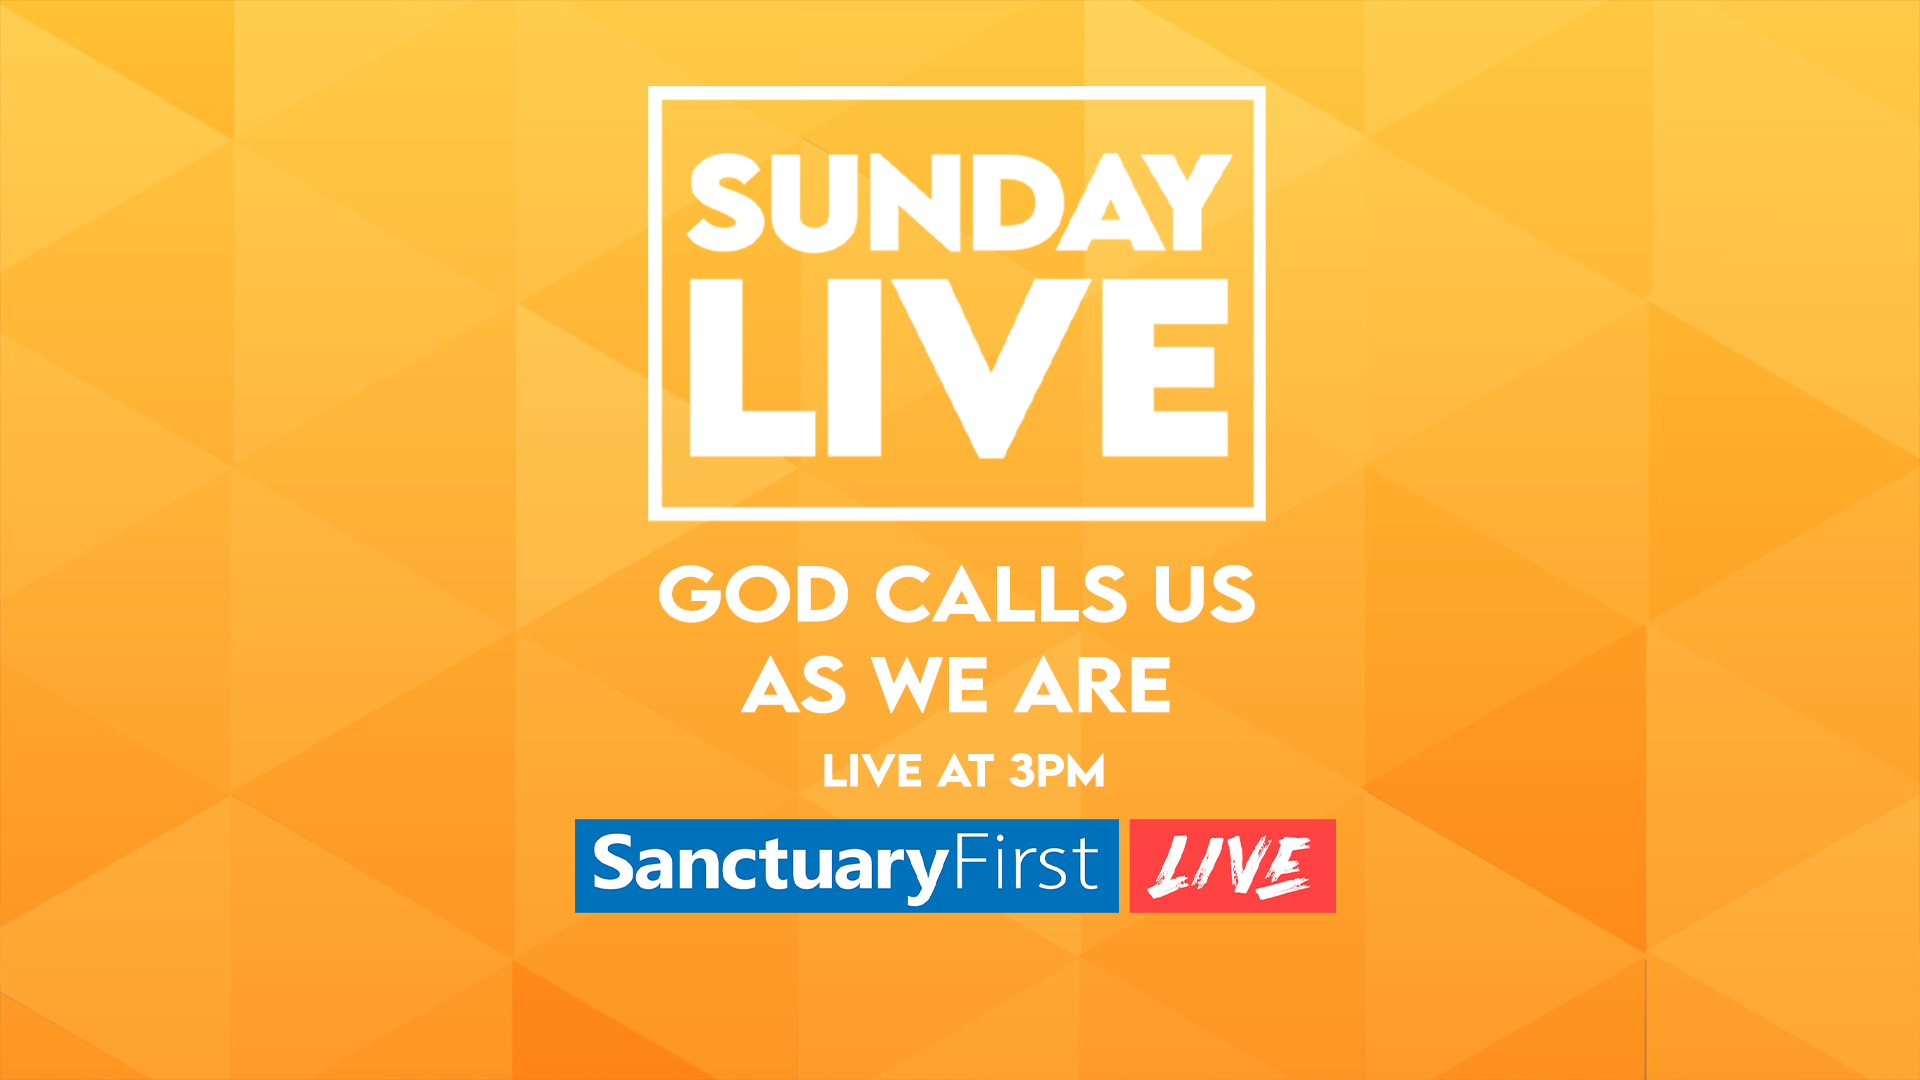 Sunday Live - God Calls Us As We Are